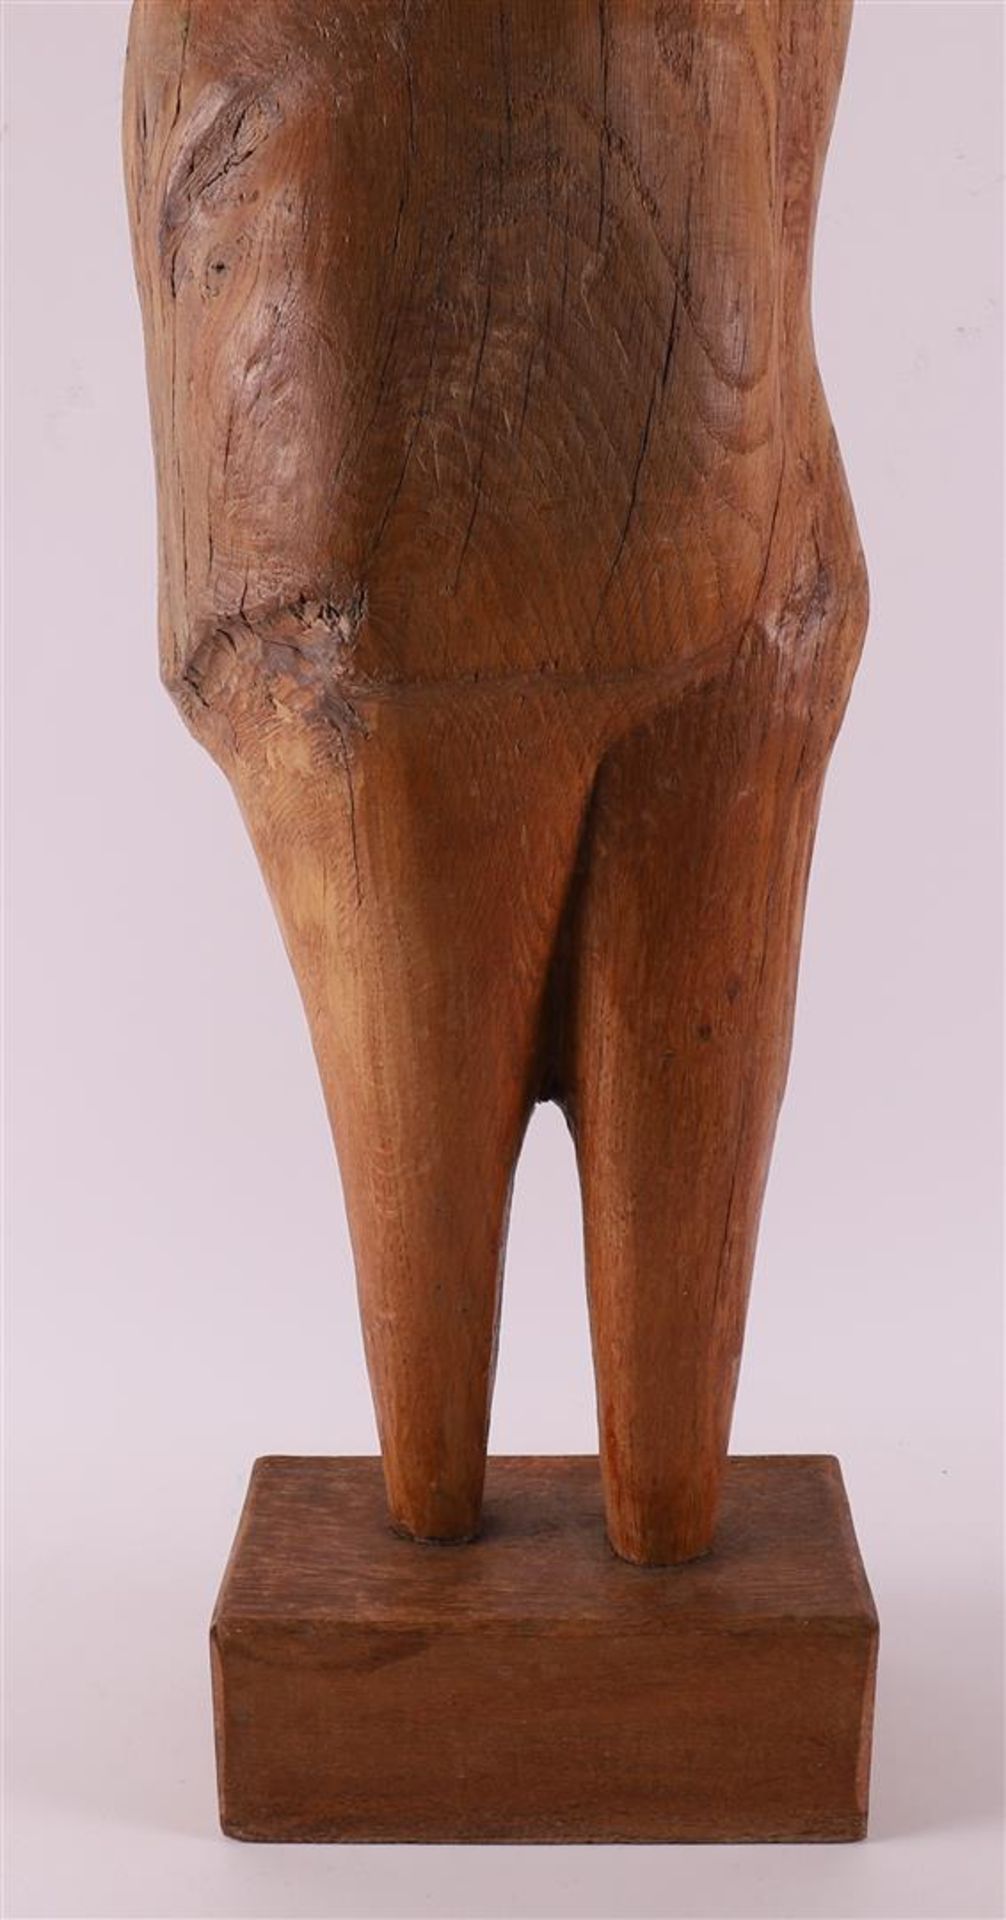 Eggen, Gene (1921-2000) A wooden sculpture of a woman, 2nd half of the 20th cent - Image 3 of 7